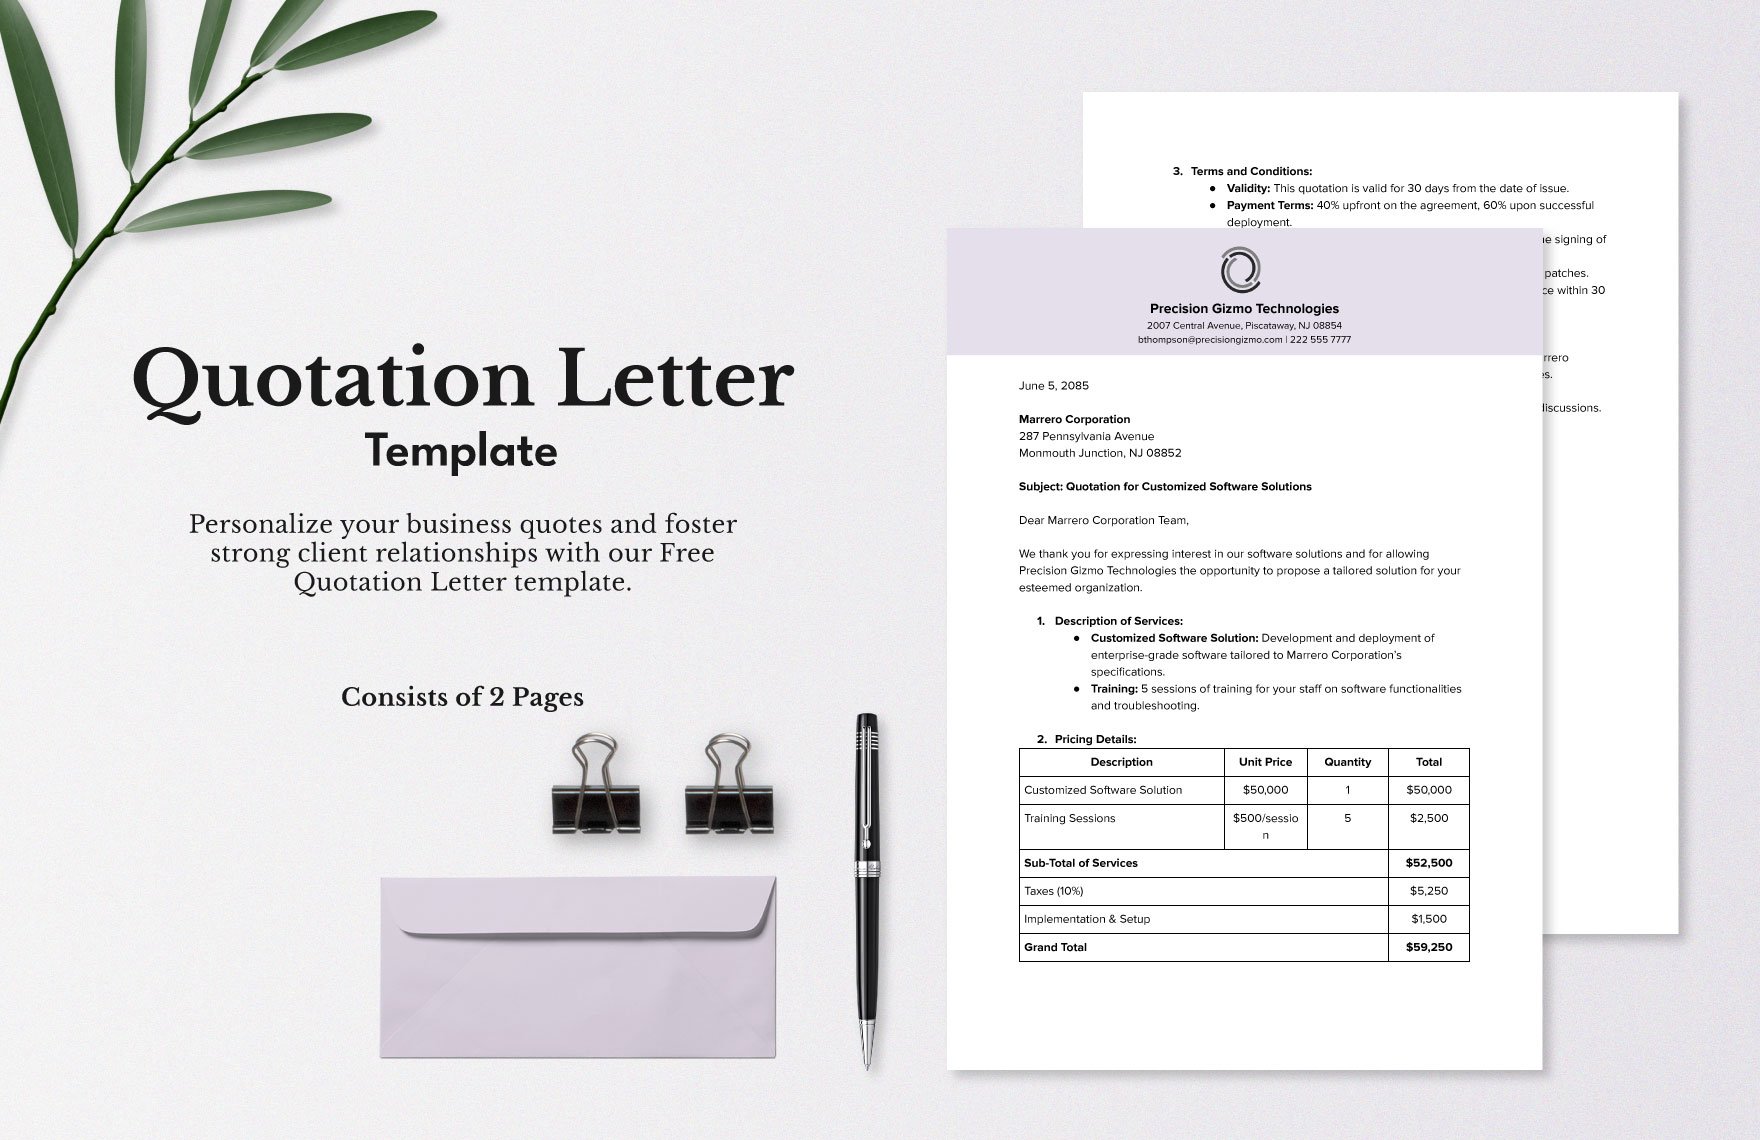 Quotation Letter Template in Word, Google Docs, PDF, Apple Pages